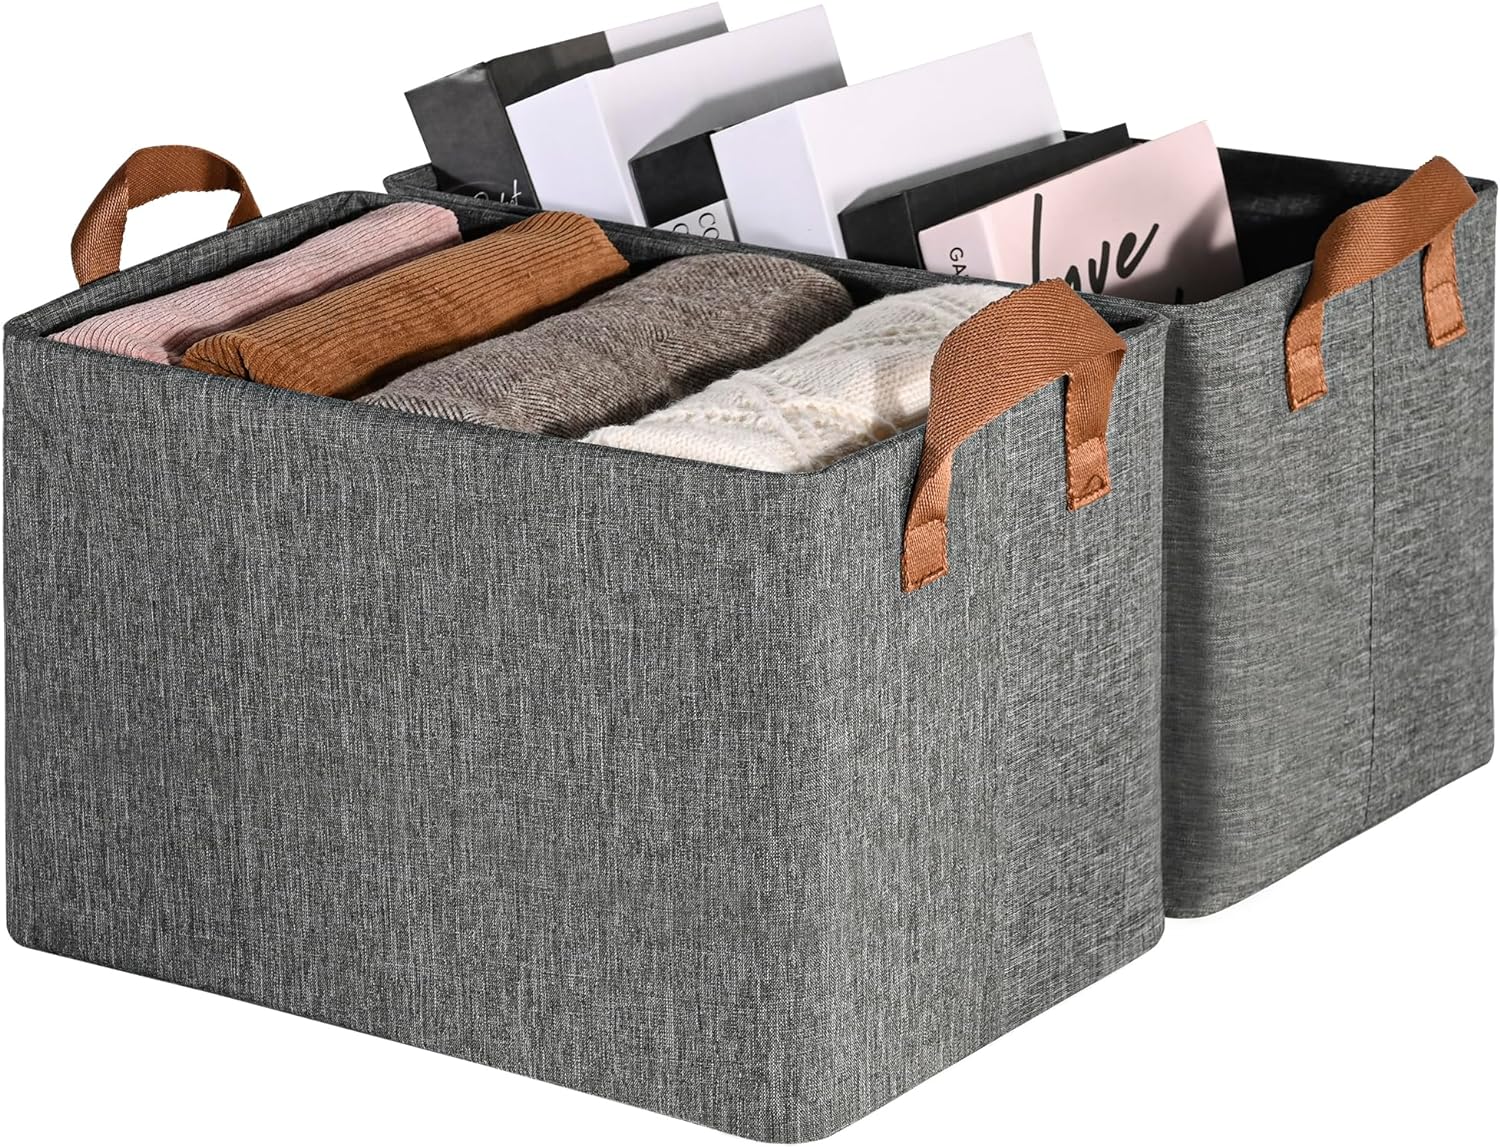 GRANNY SAYS Storage Closet Bins with Metal Frame, Fabric Storage Bins, Extra Large Foldable Storage Boxes, Closet Organizers and Storage Baskets for Closet Living Room Shelves, Dark Gray, 2-Pack